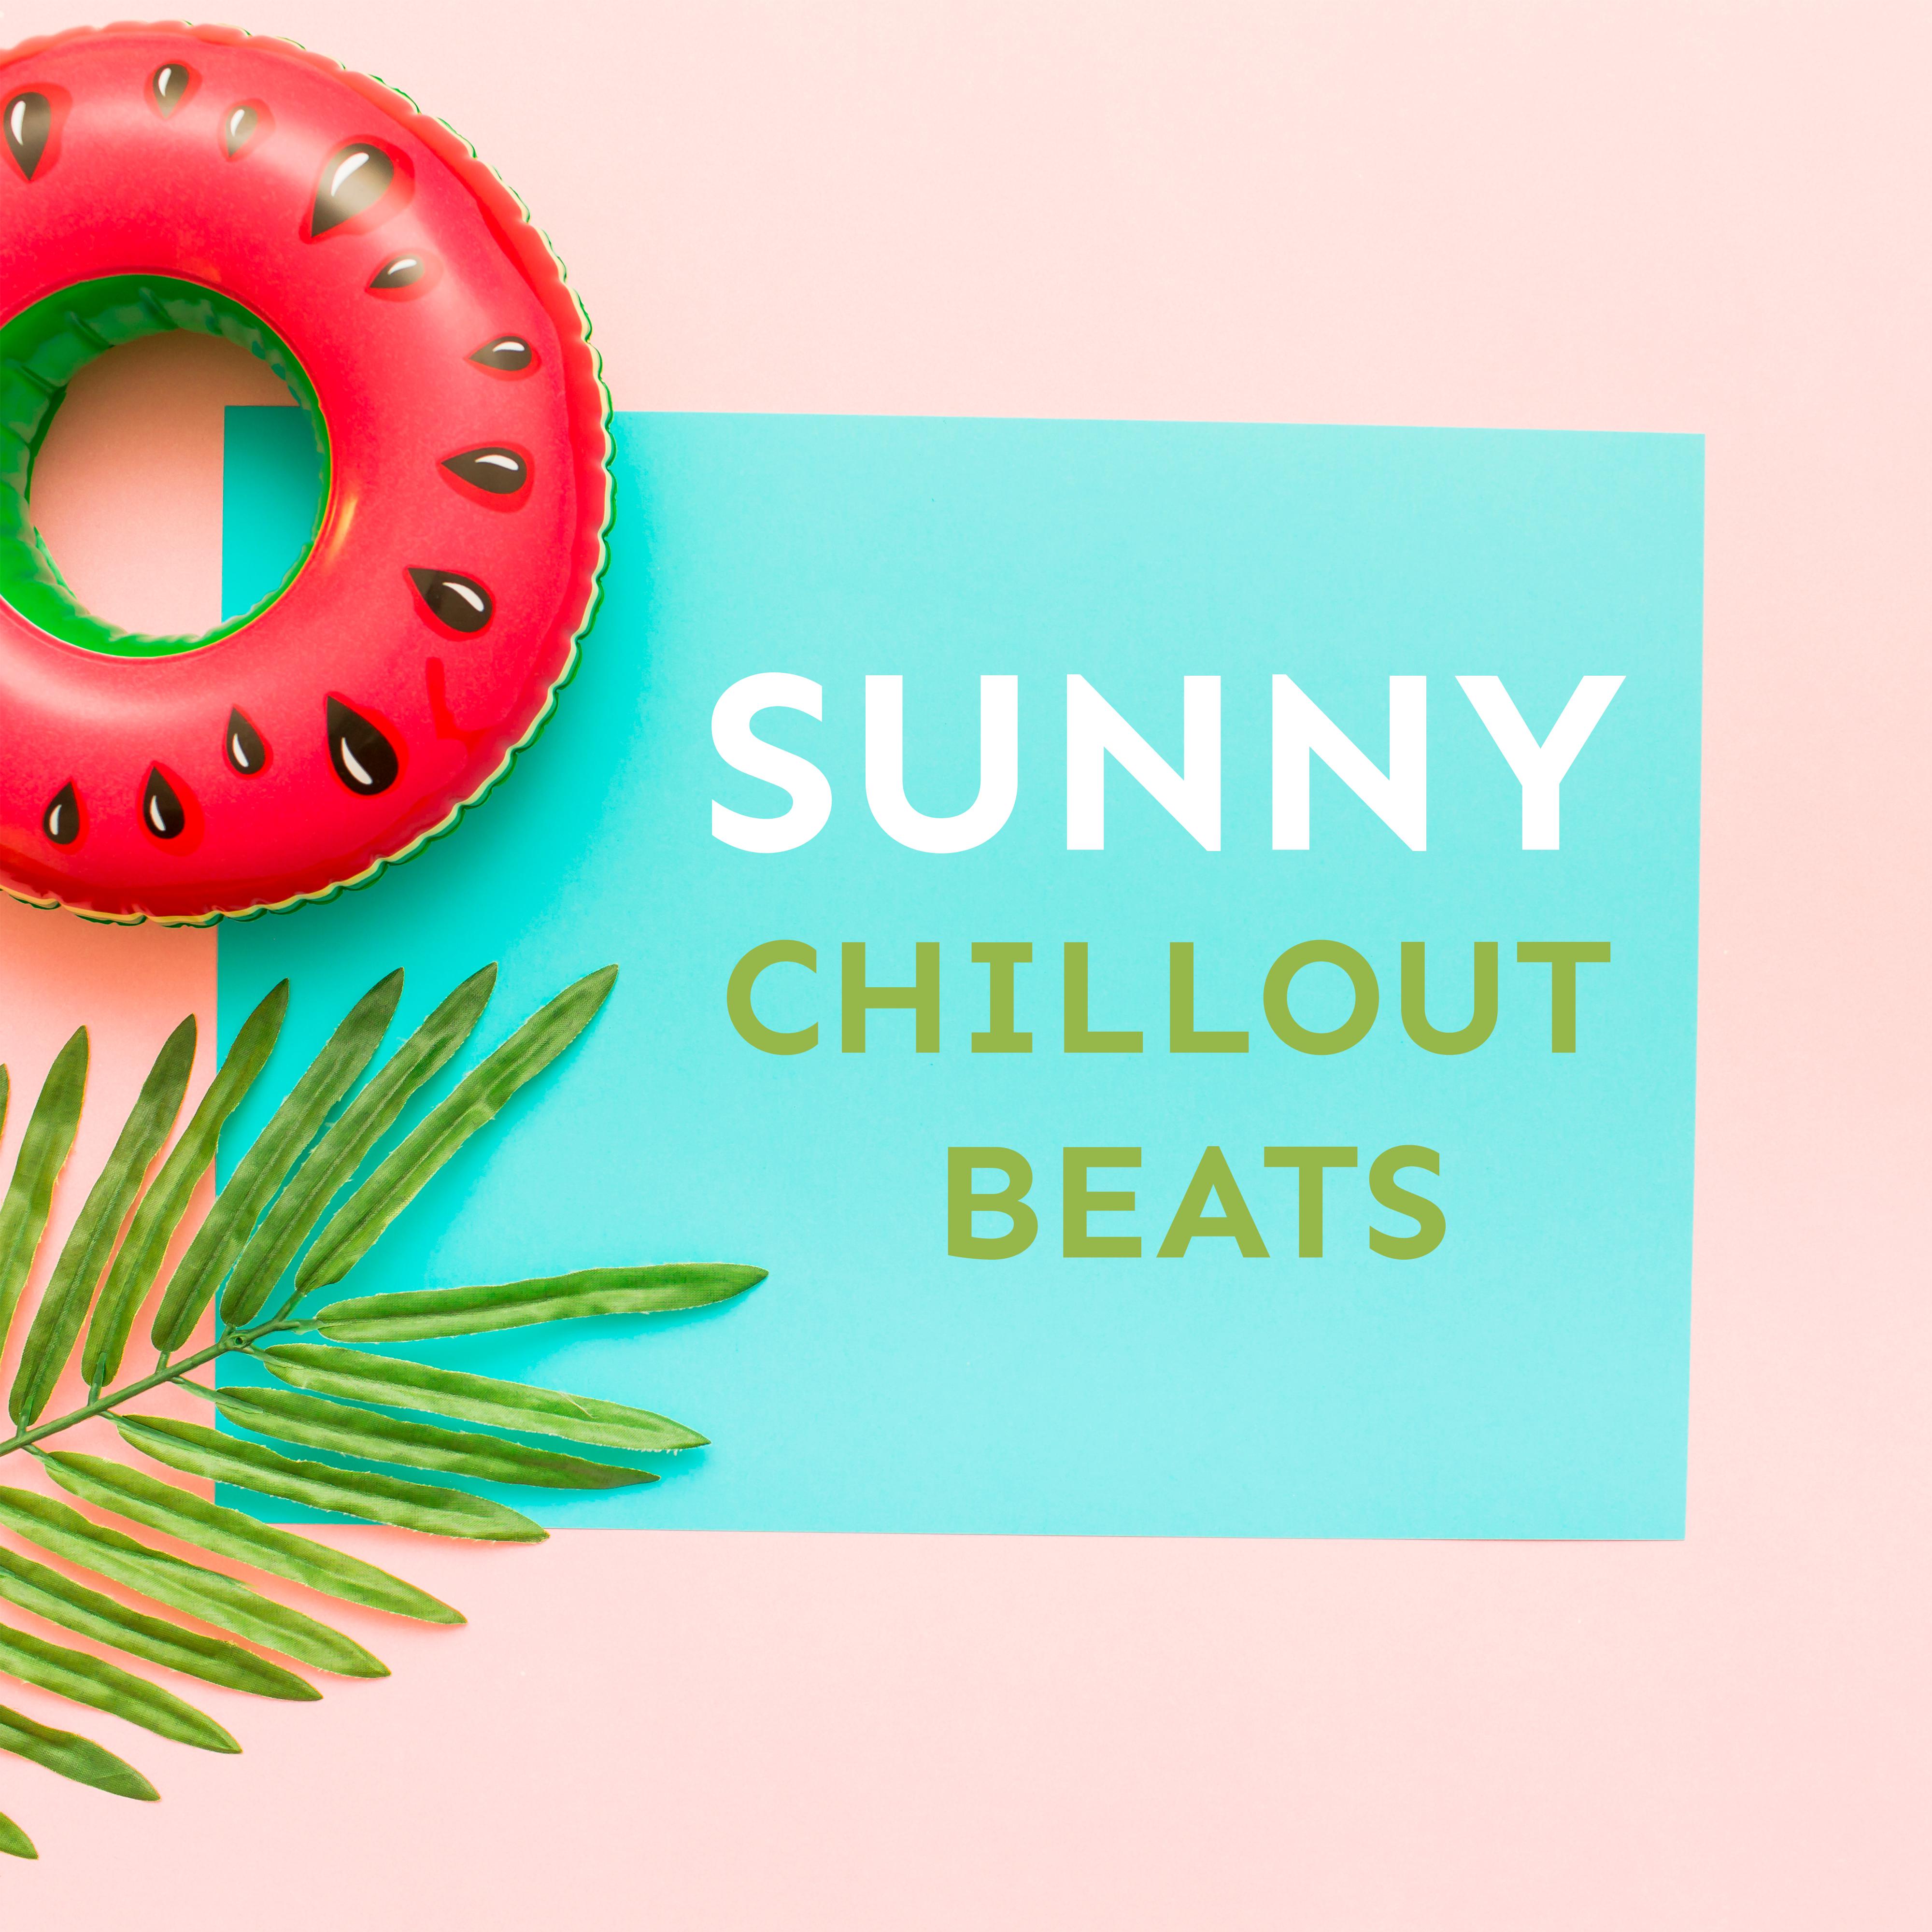 Sunny Chillout Beats